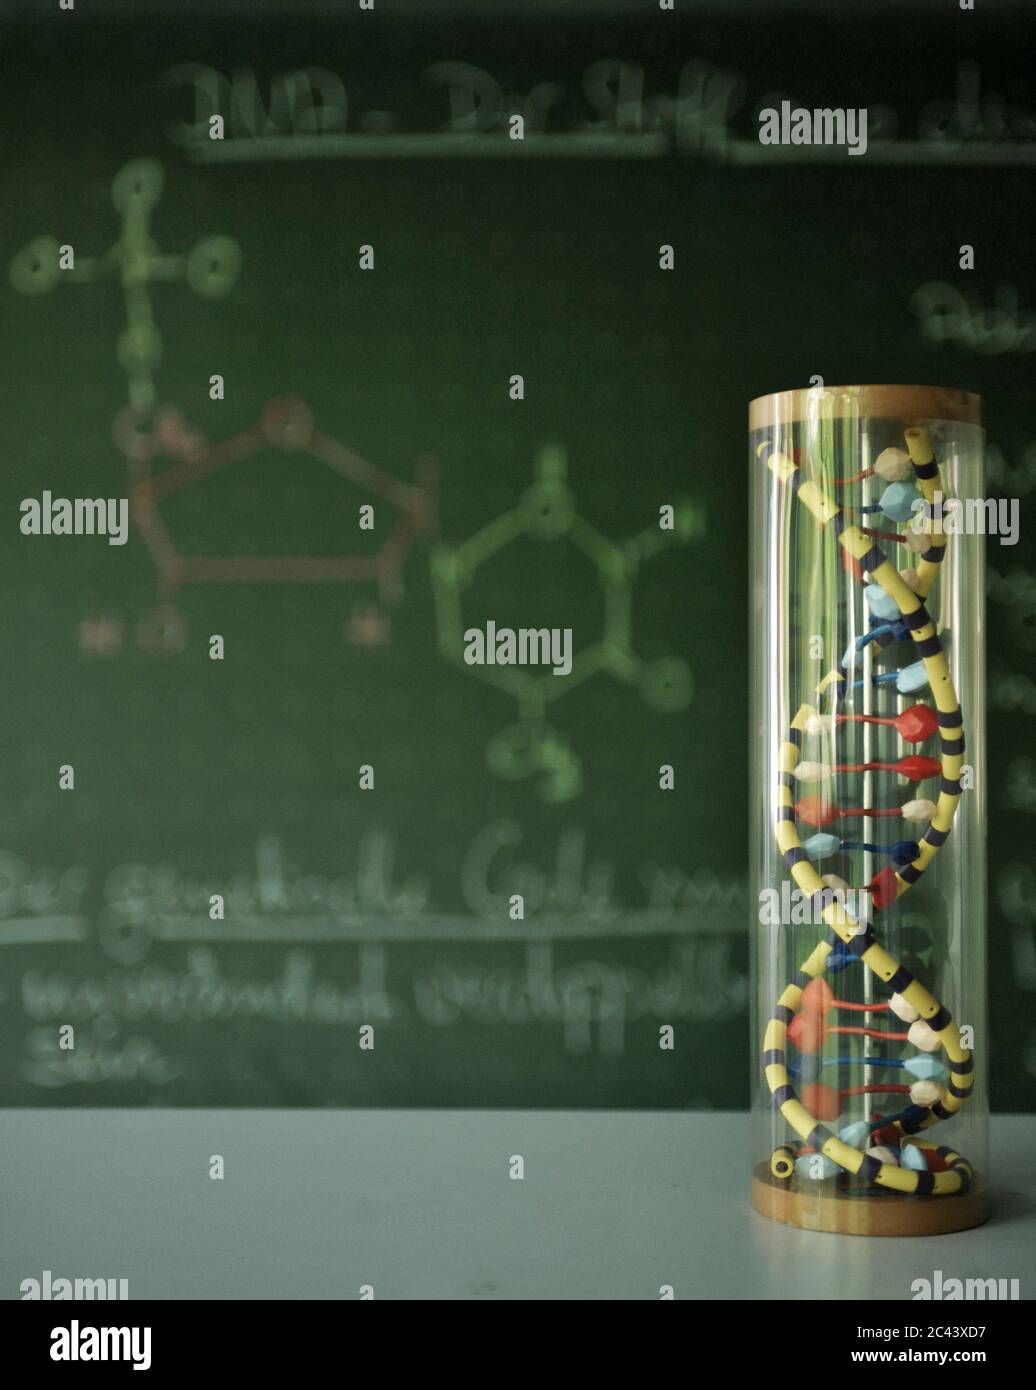 DNA strand in front of a blackboard Stock Photo